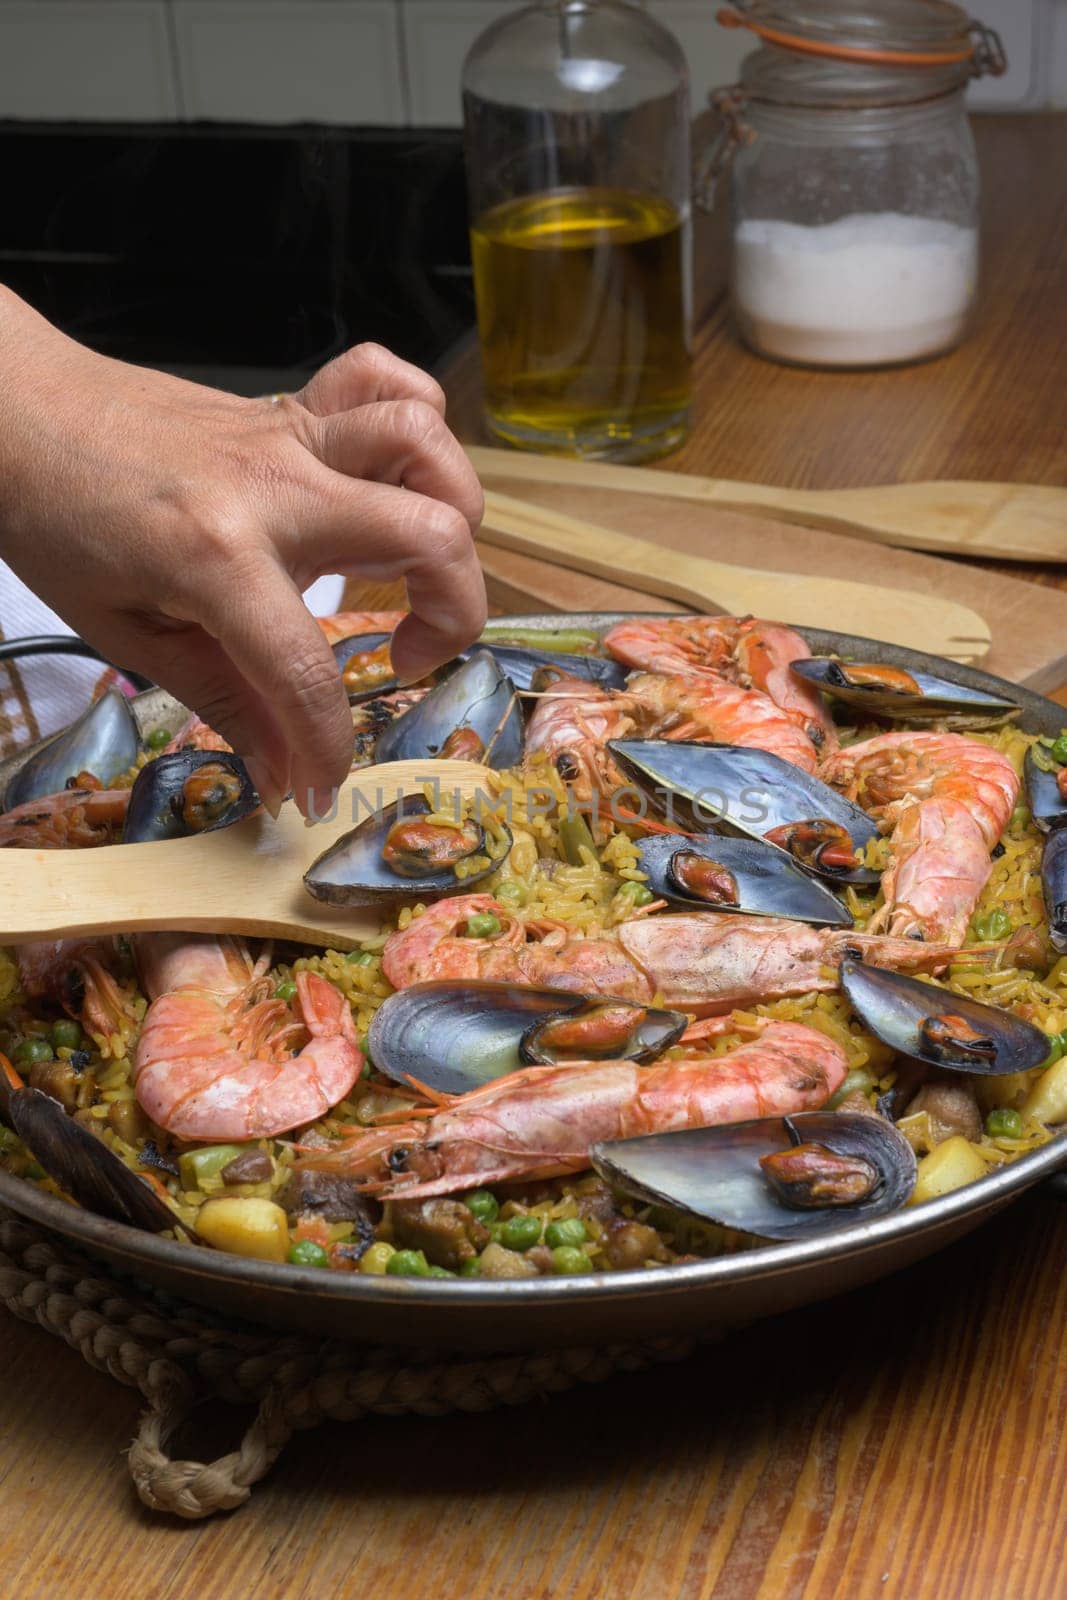 Cooking paella with shrimp and mussels using a wooden utensil in a home kitchen, typical Spanish cuisine, Majorca, Balearic Islands, Spain,